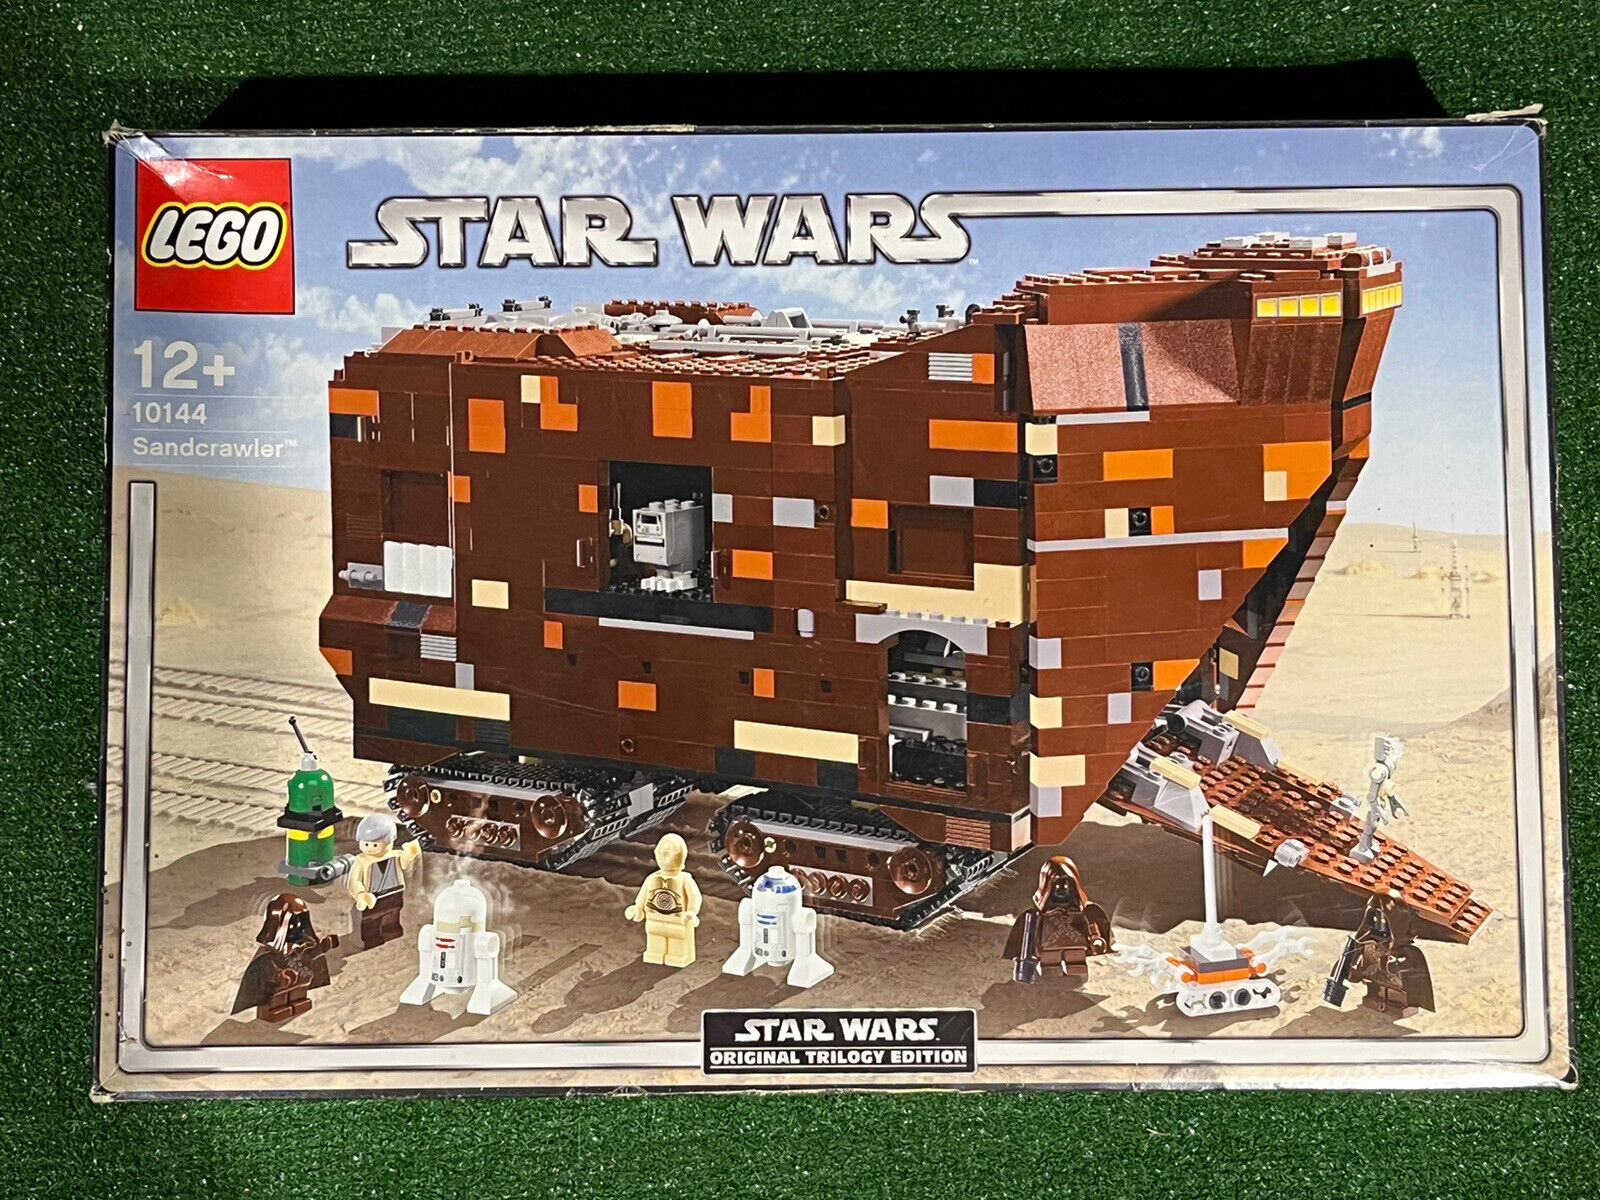 LEGO Star Wars: Sandcrawler (10144) 100% complete with box and manual